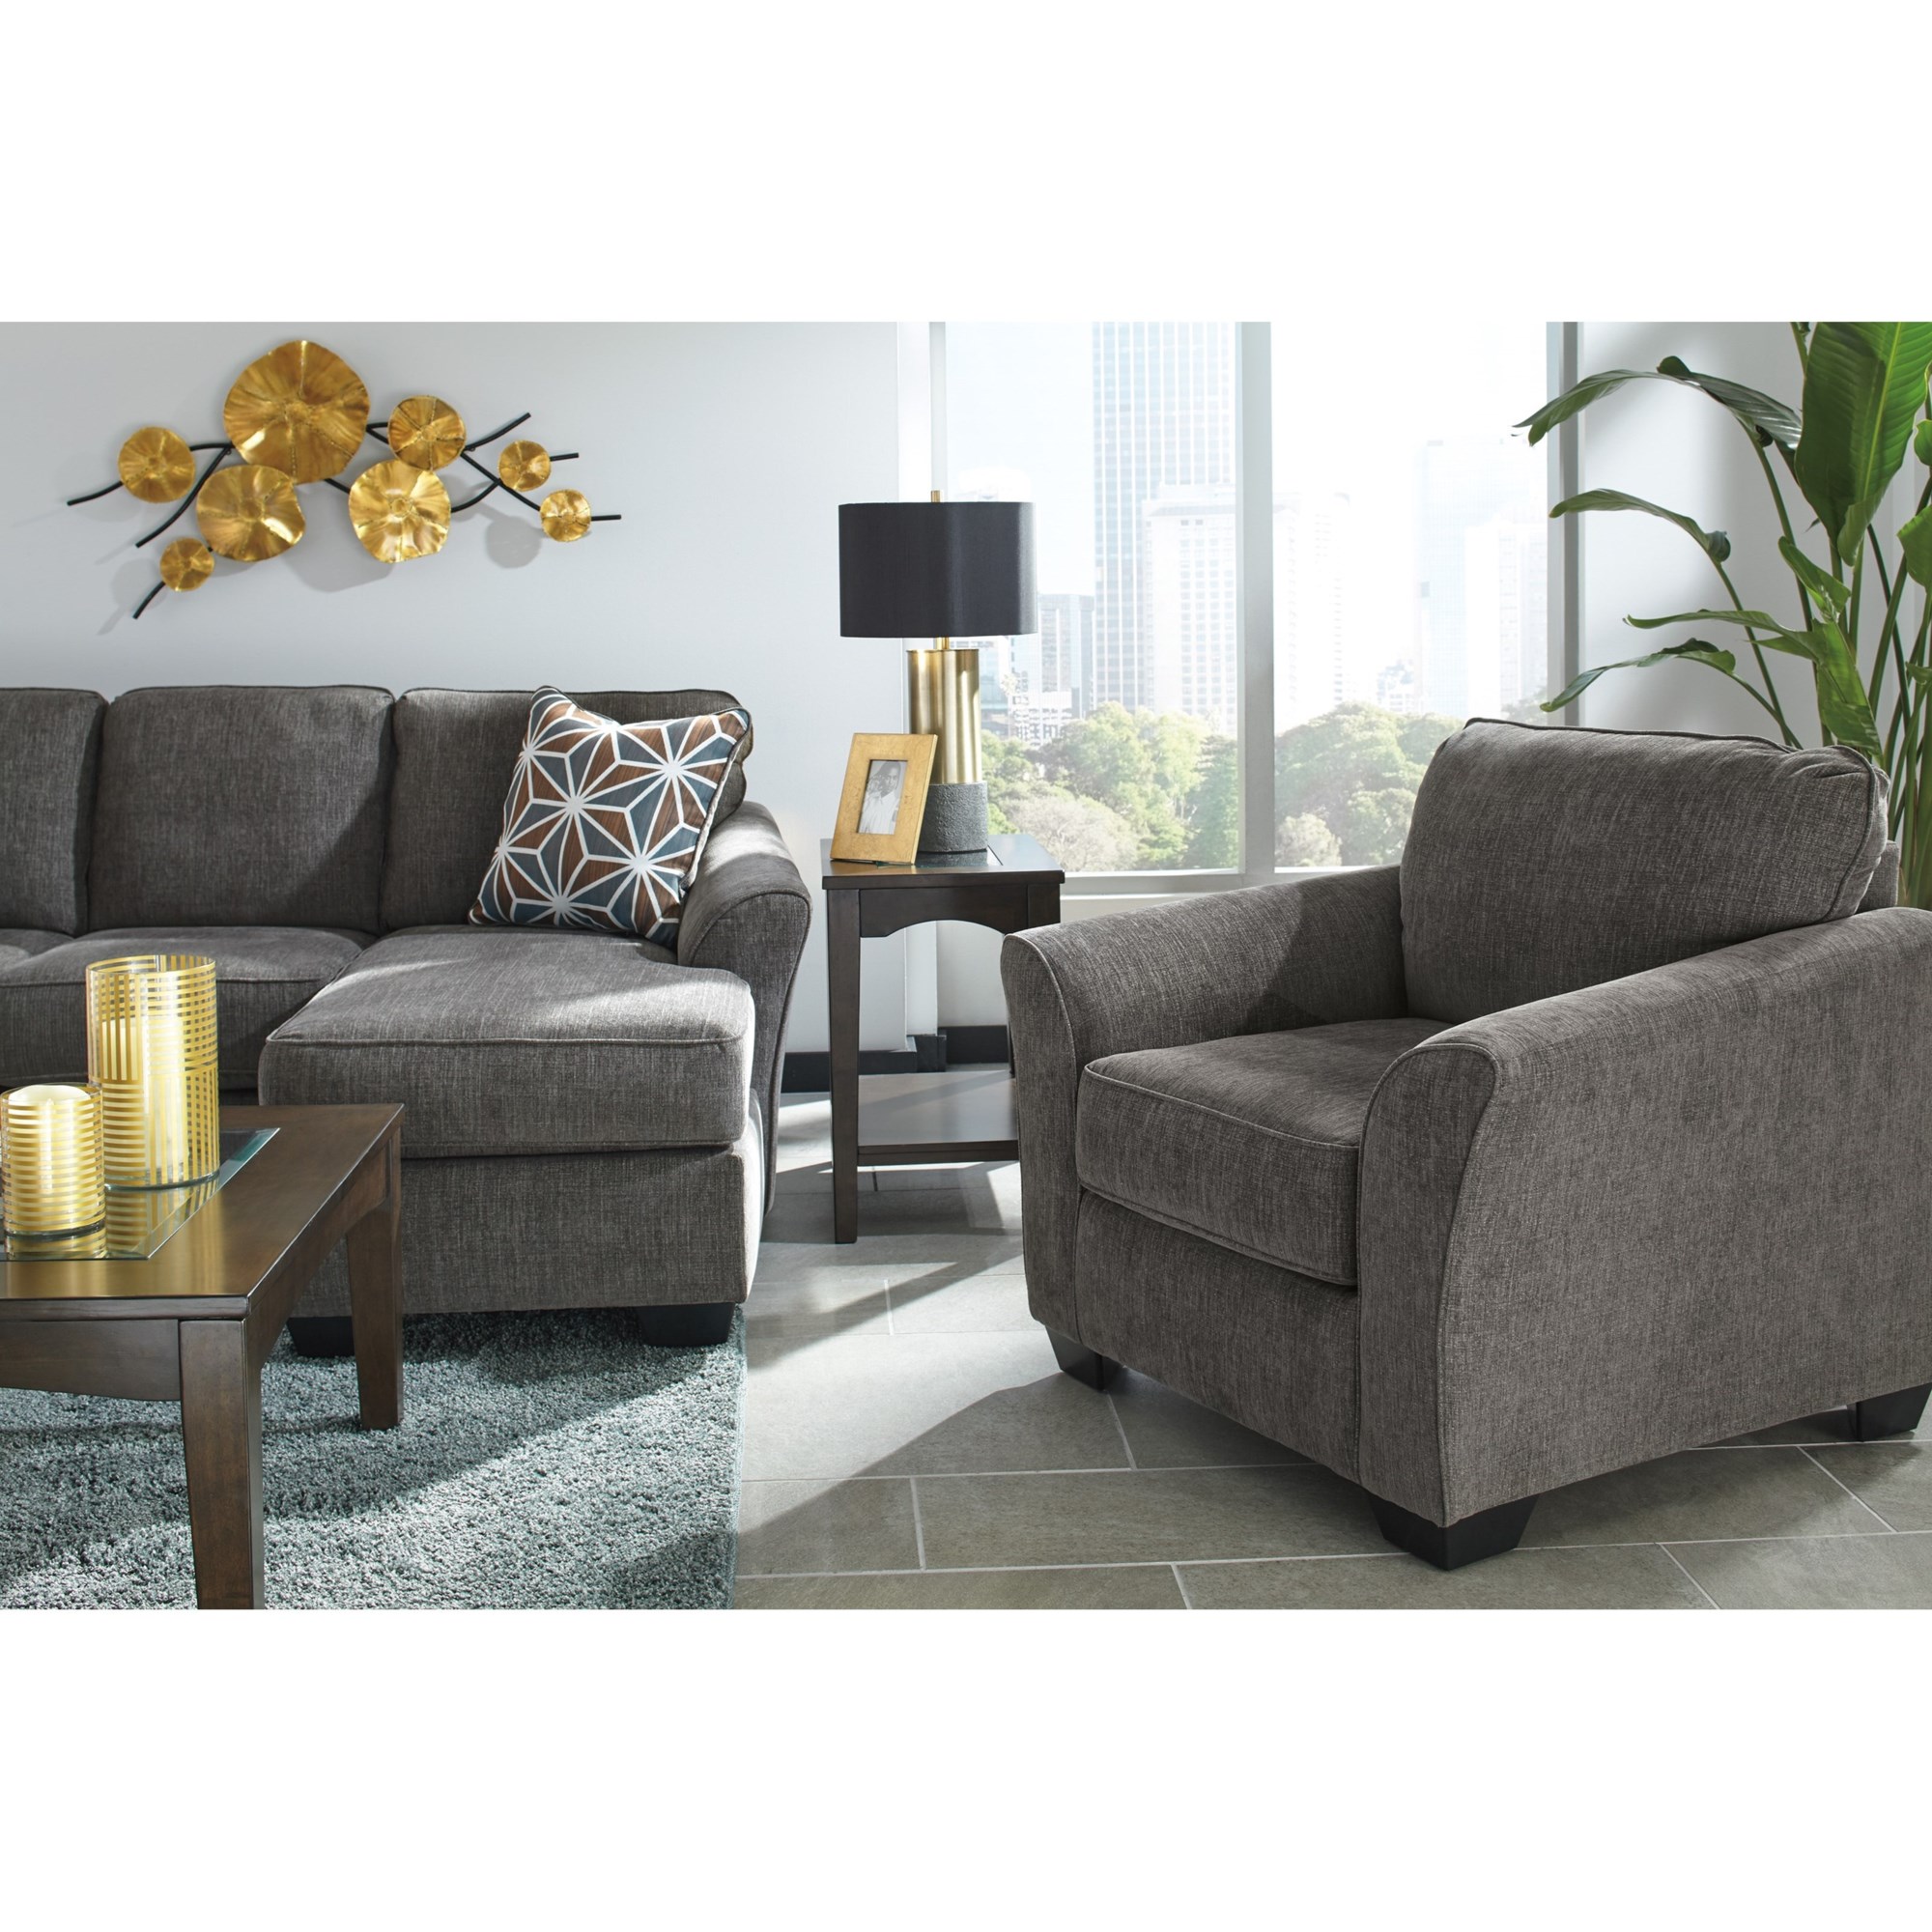 Shop our Brise Slate Queen Memory Foam Sleeper Sofa by Benchcraft